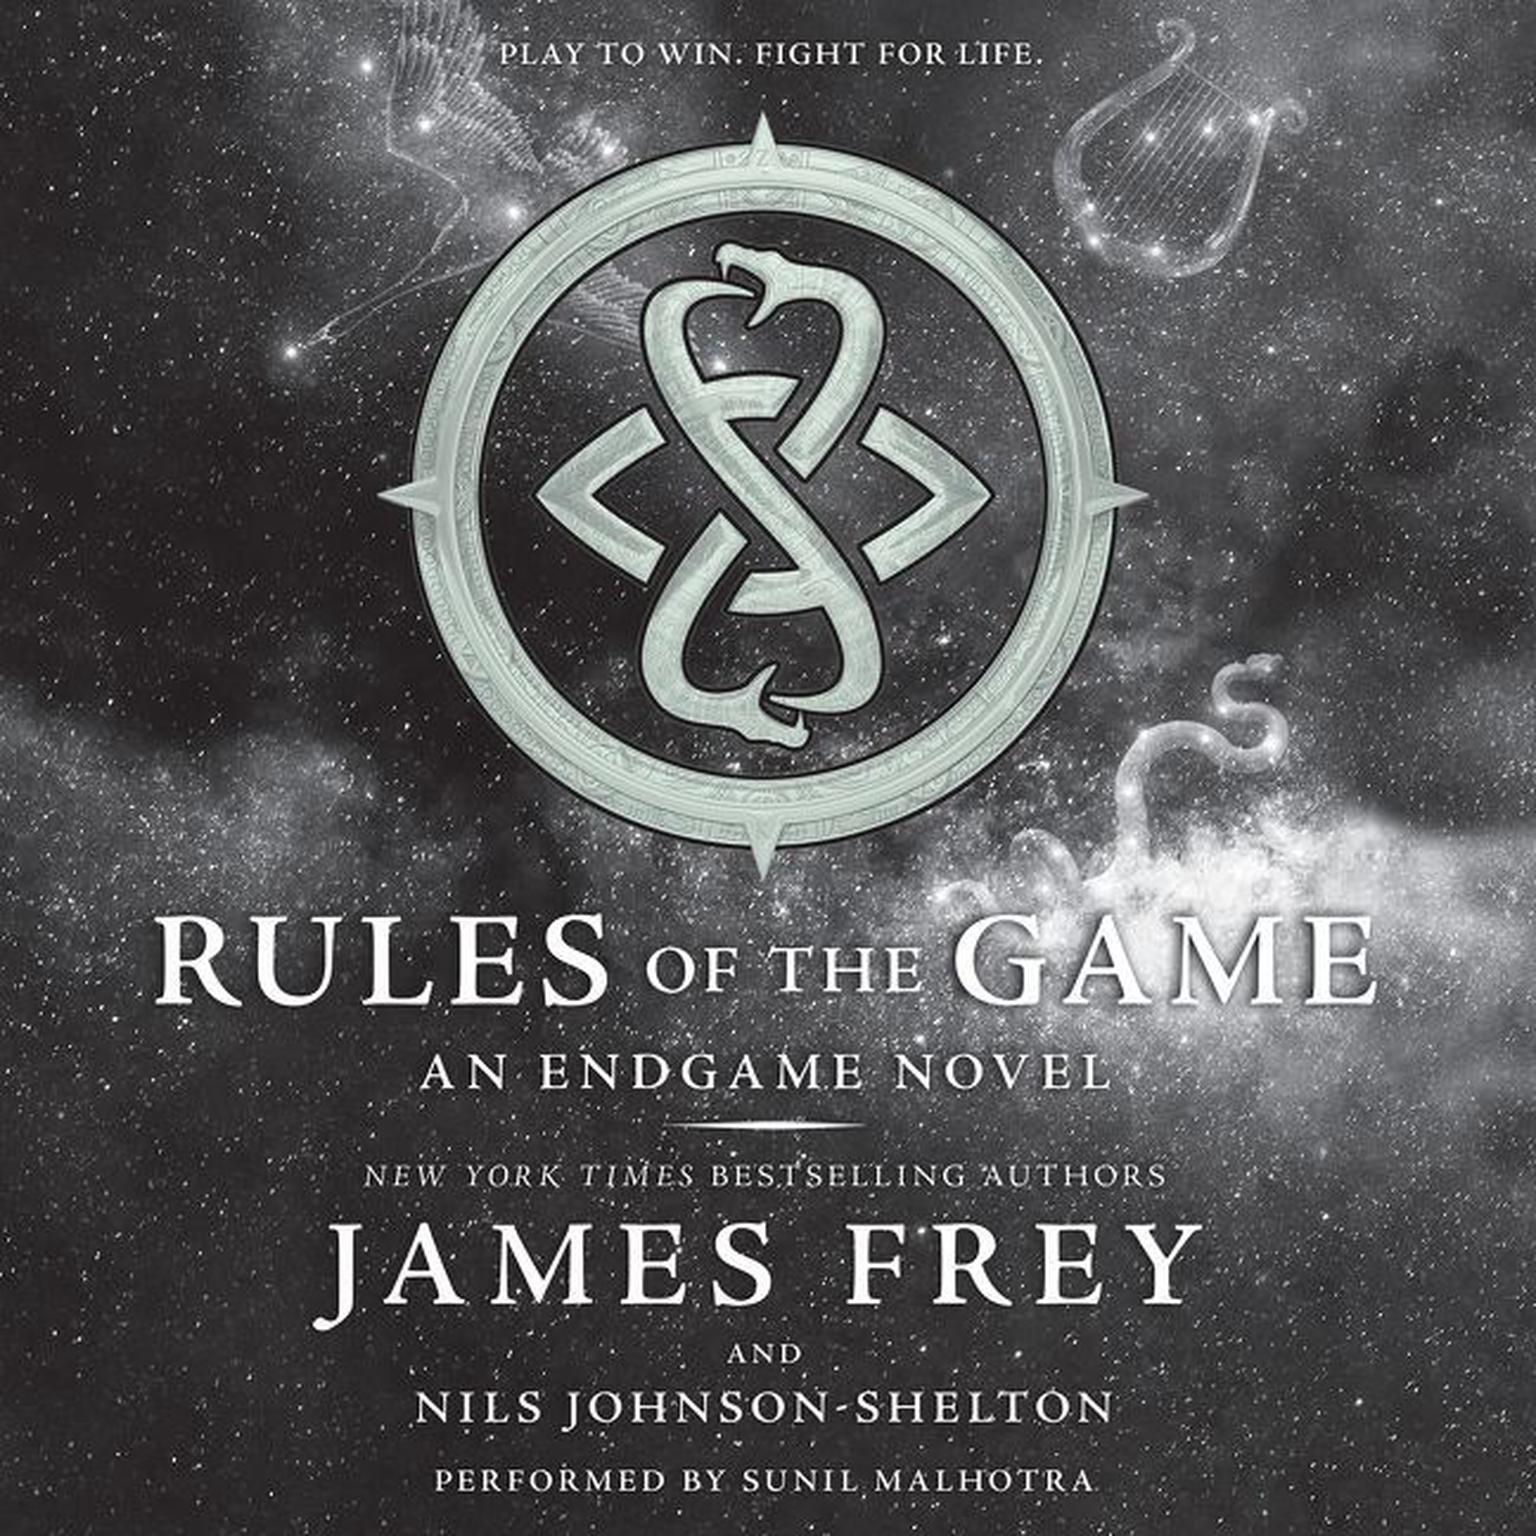 Endgame: Rules of the Game: An Endgame Novel Audiobook, by James Frey